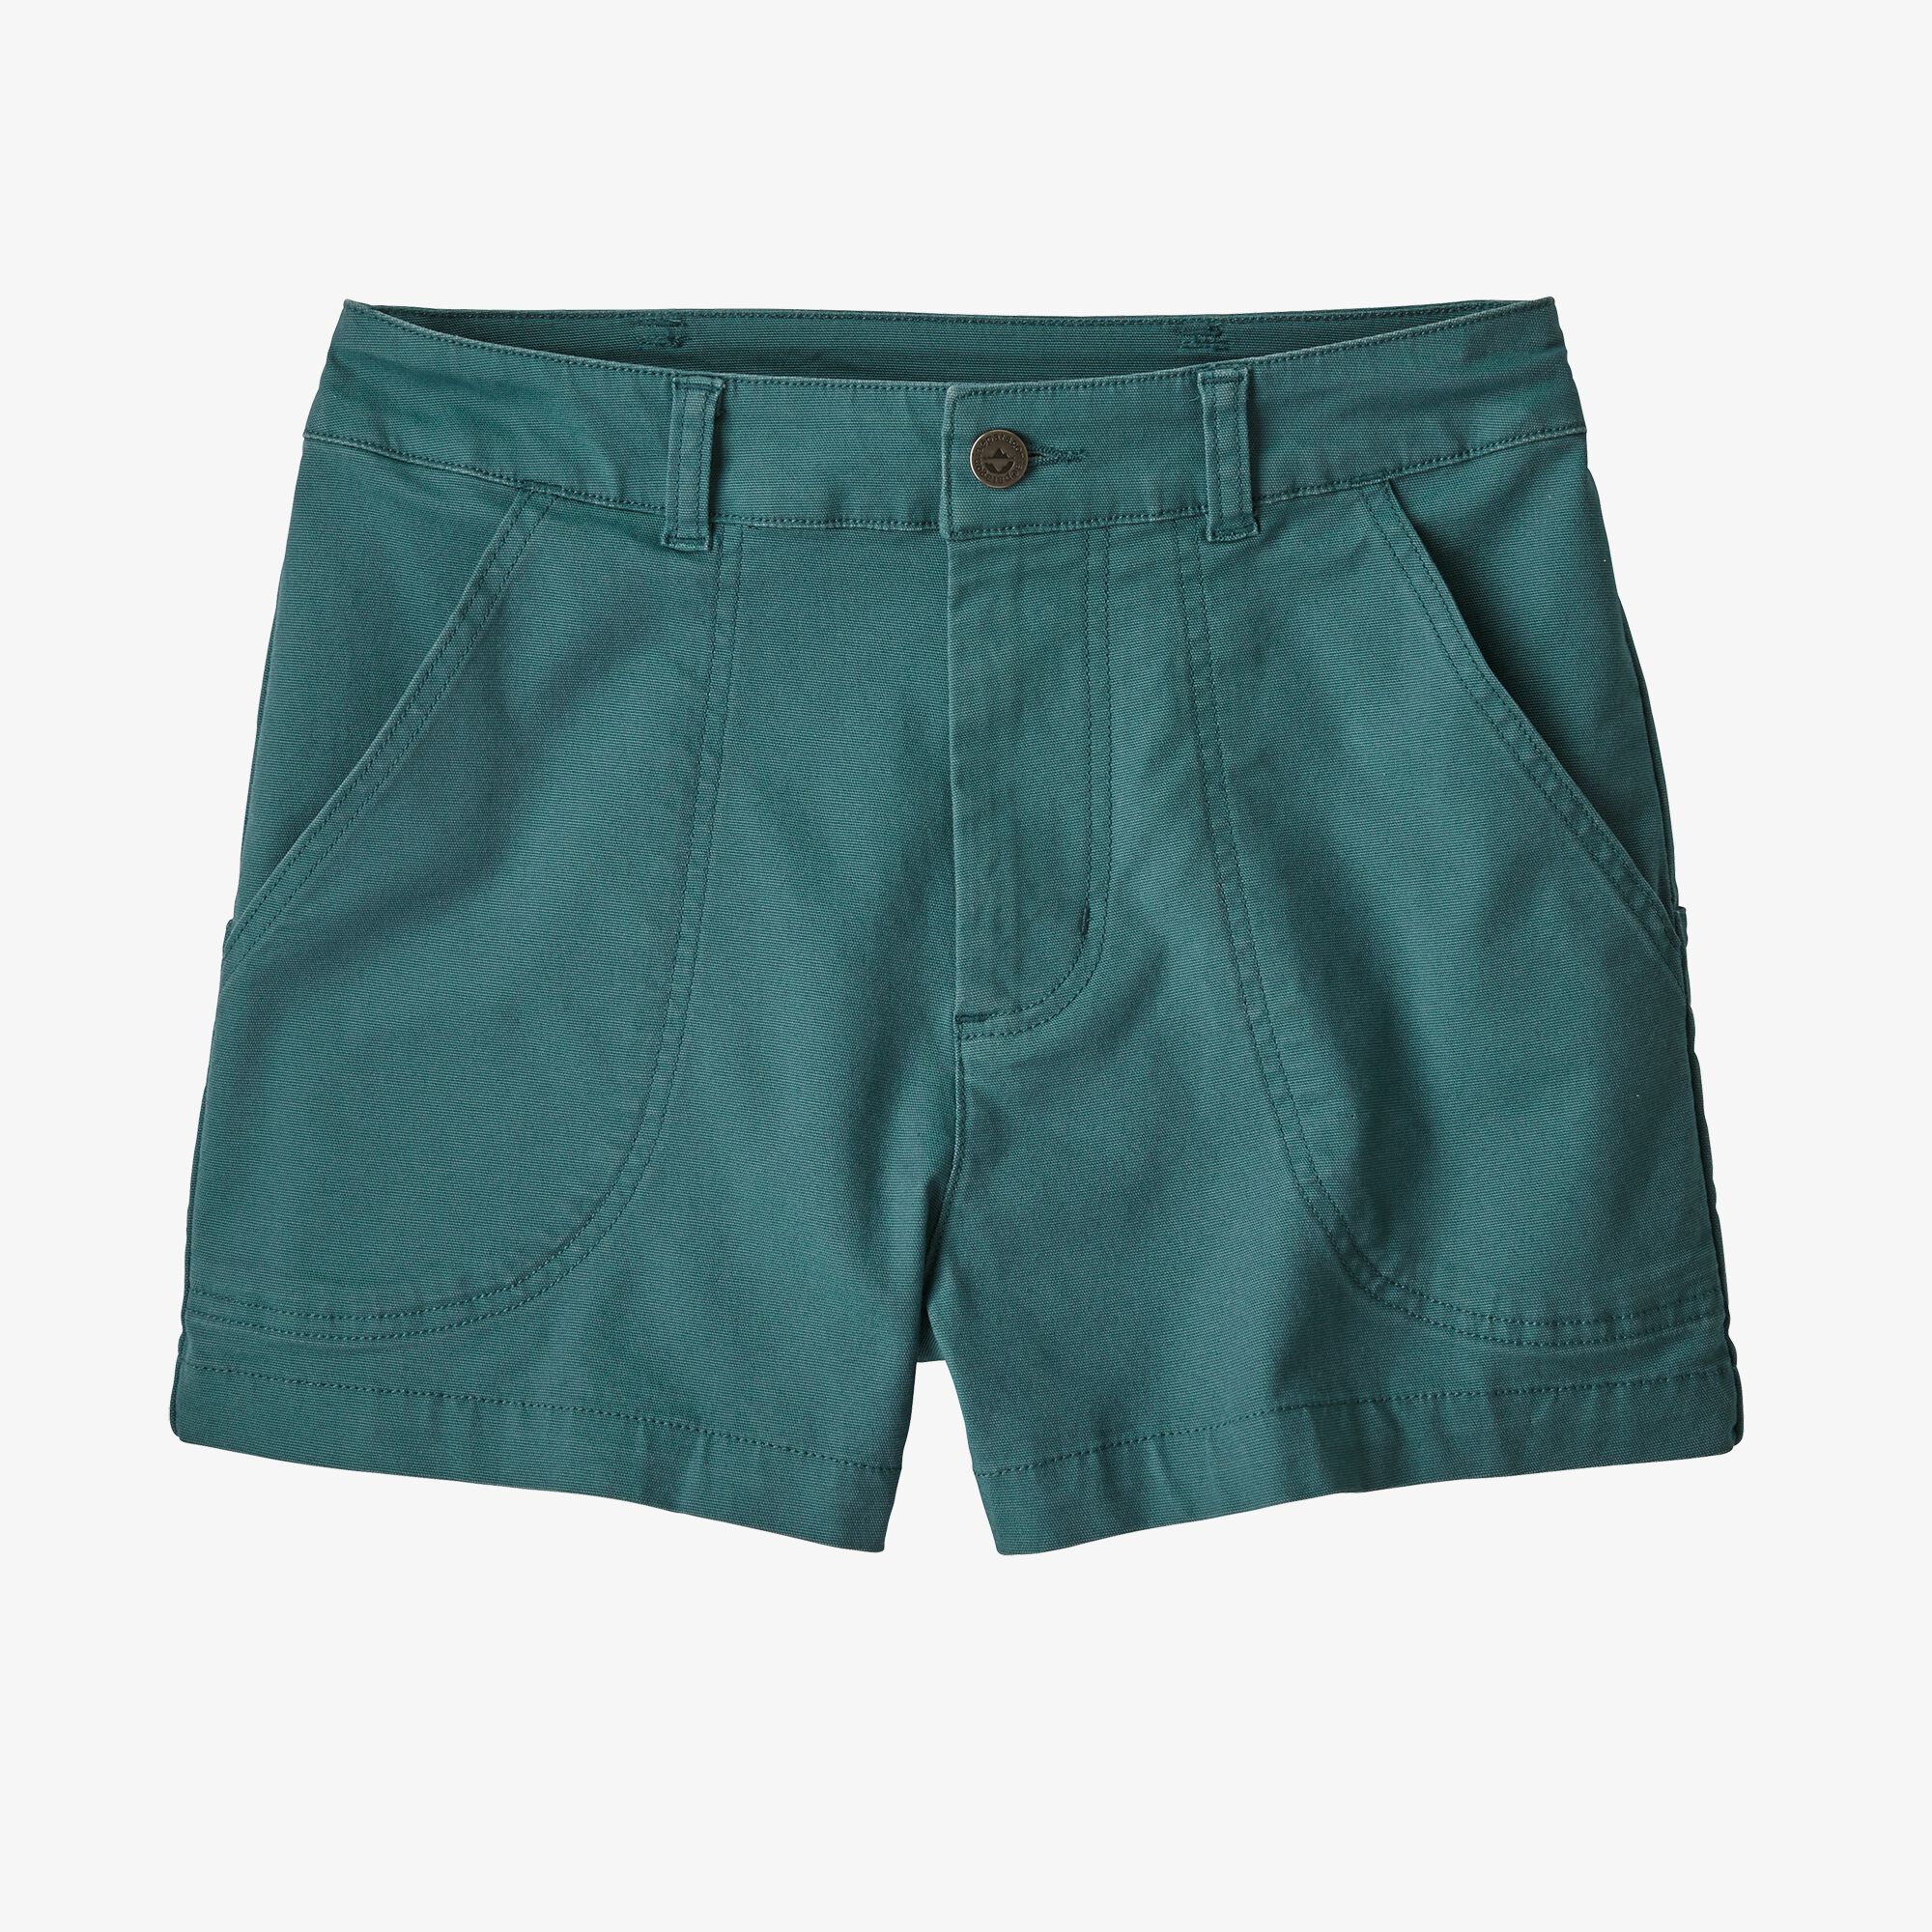 Patagonia Women's Stand Up® Shorts - 3